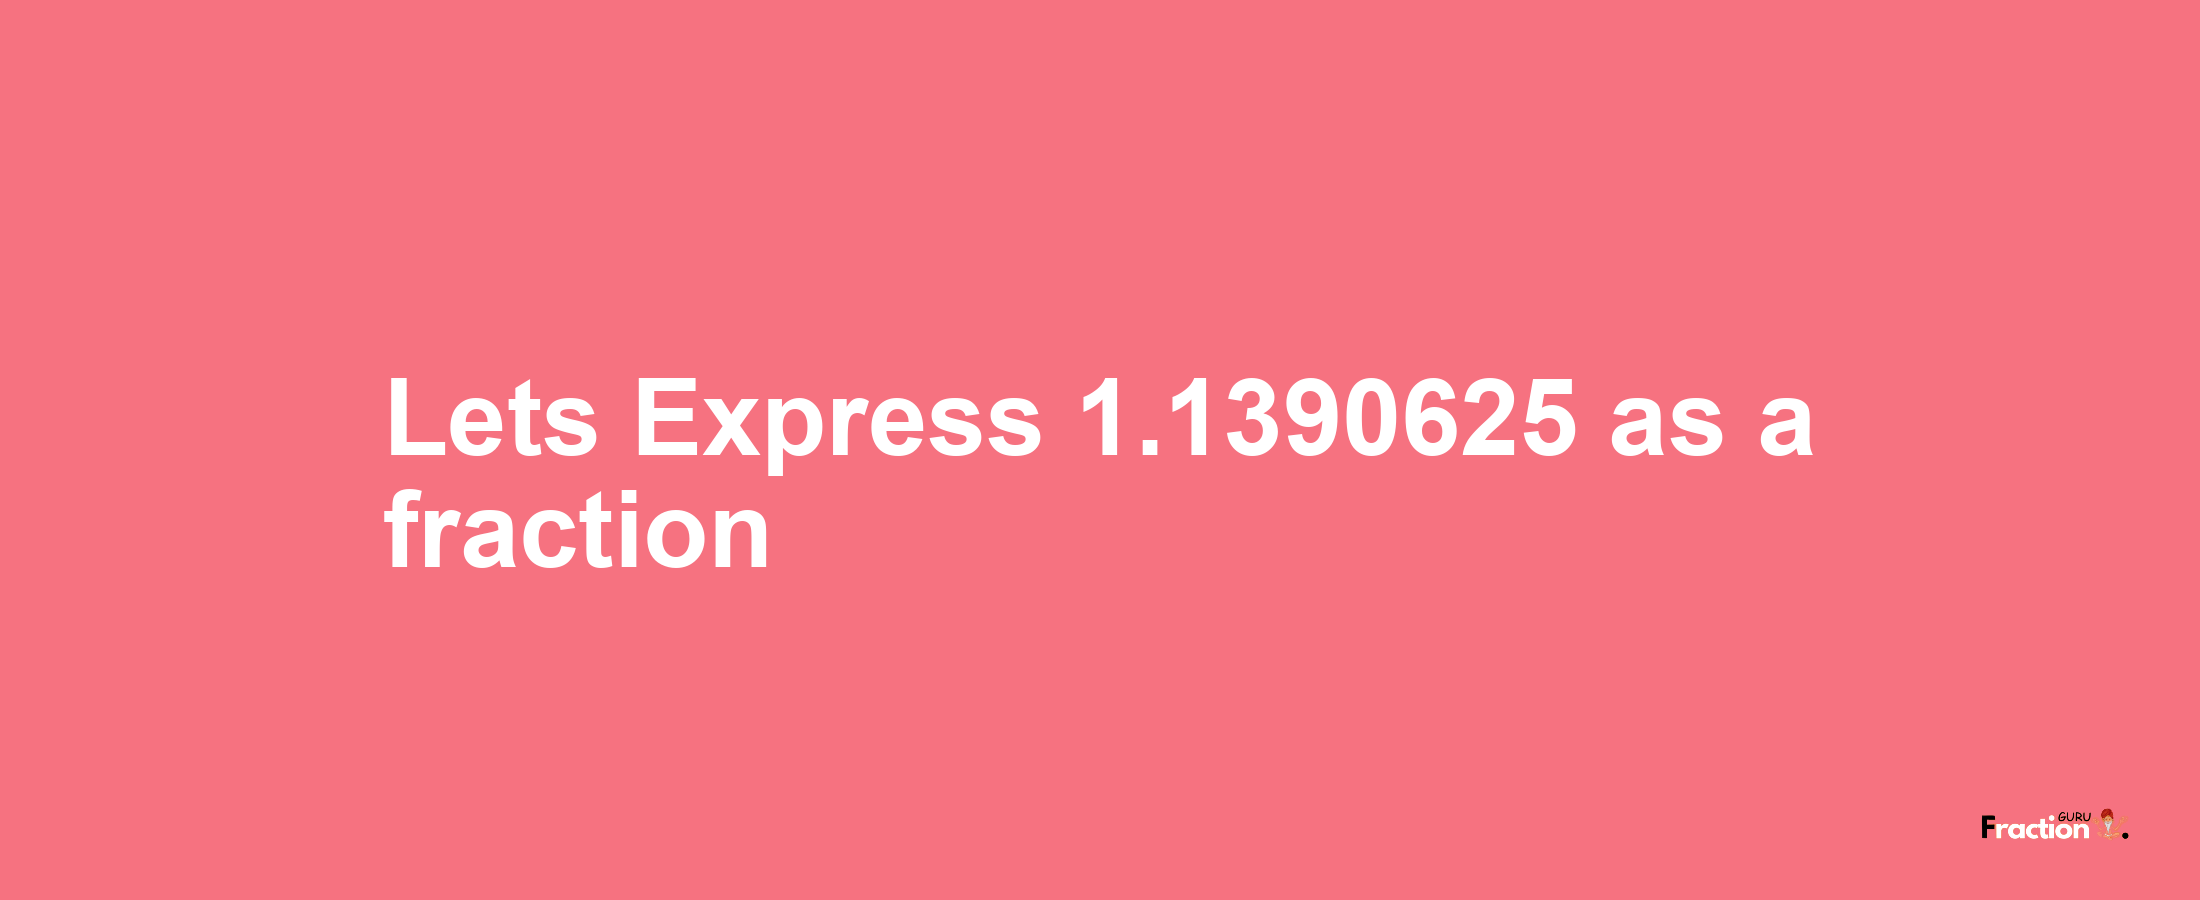 Lets Express 1.1390625 as afraction